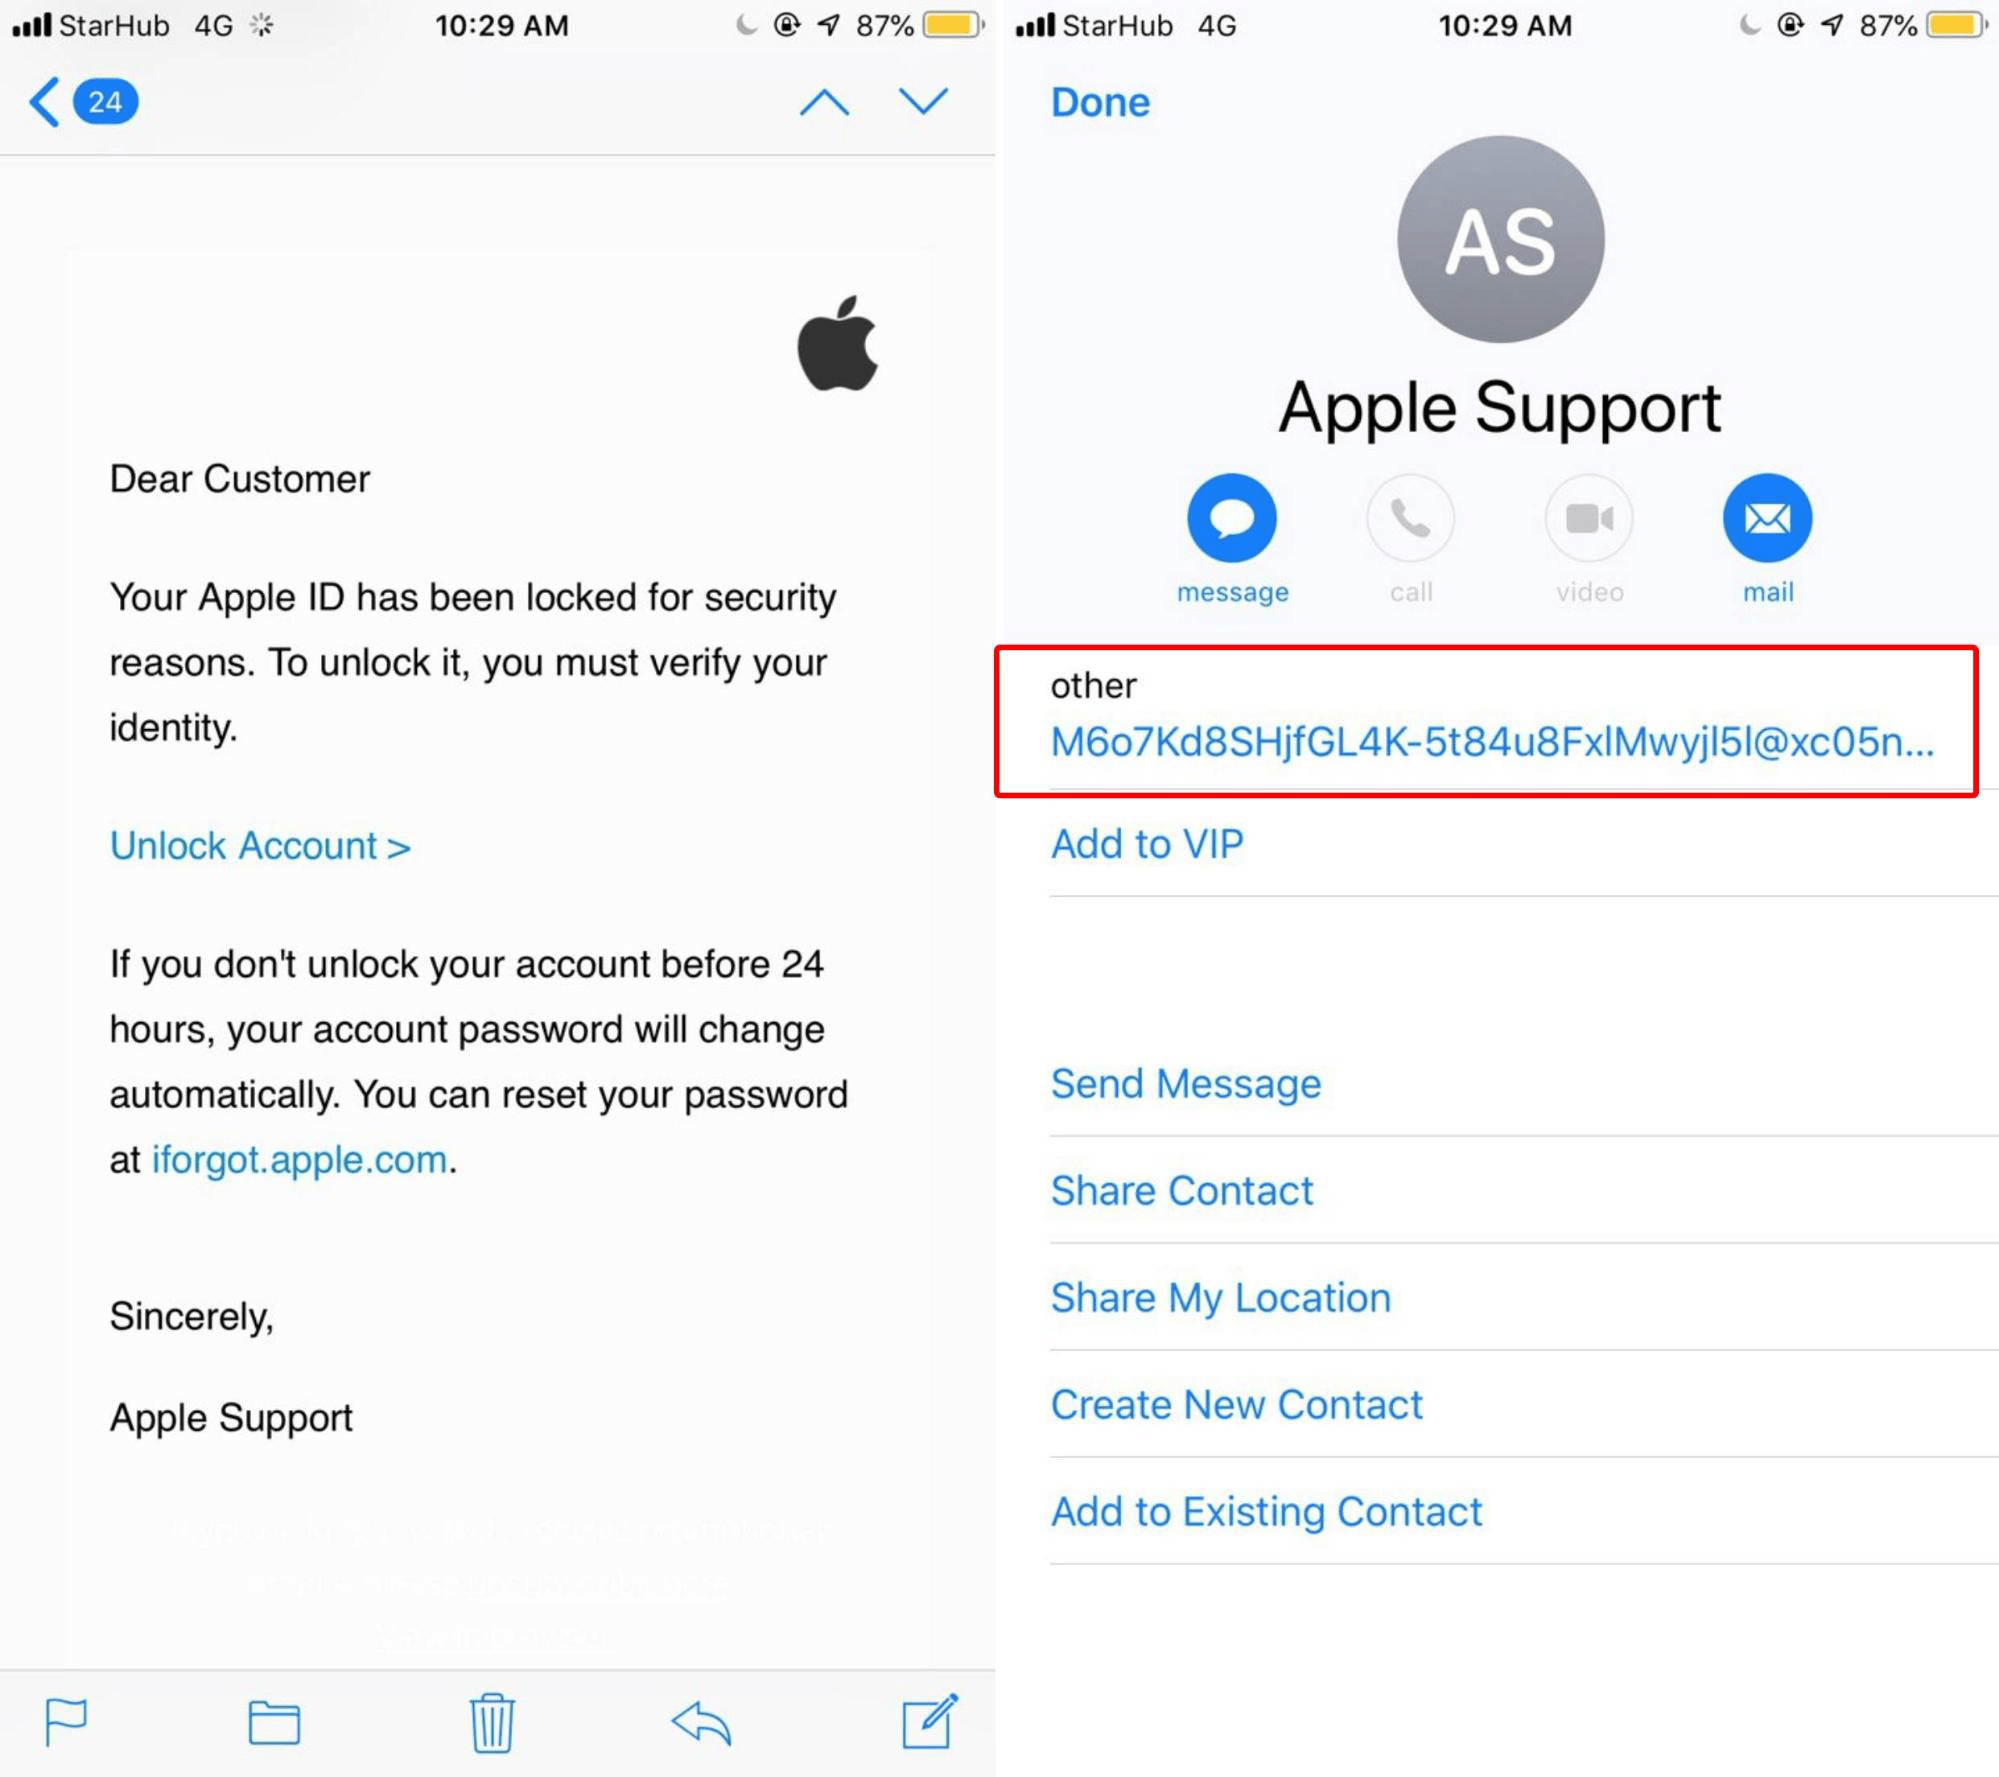 ongoing scams in singapore - fake apple email and link